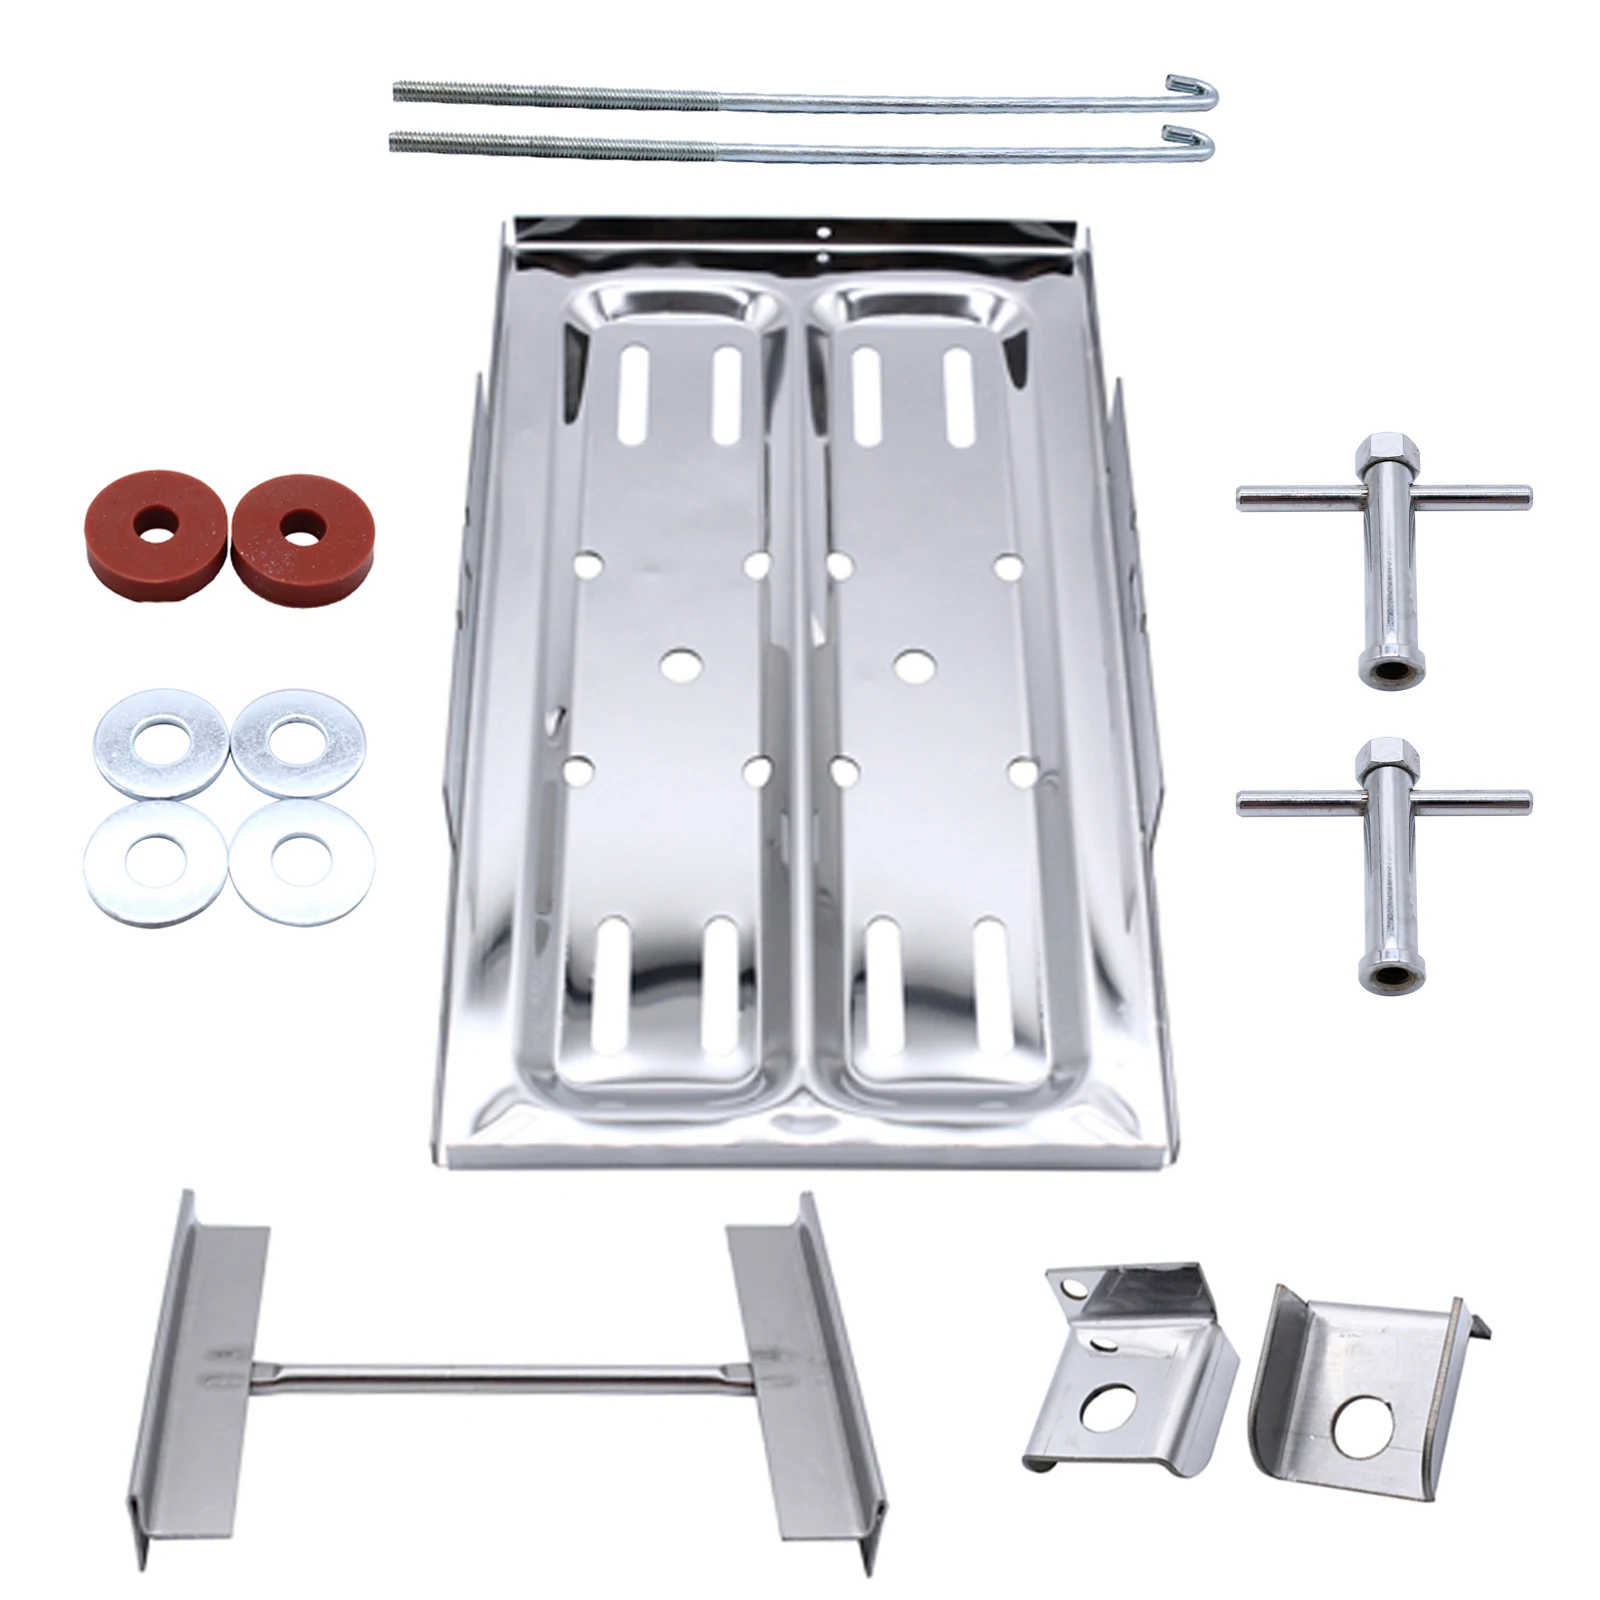 Car Battery Tray Kit, Universal Stainless Steel Battery Tray Holder Polished Hold Down Kit with J Hooks Accessories, Silver